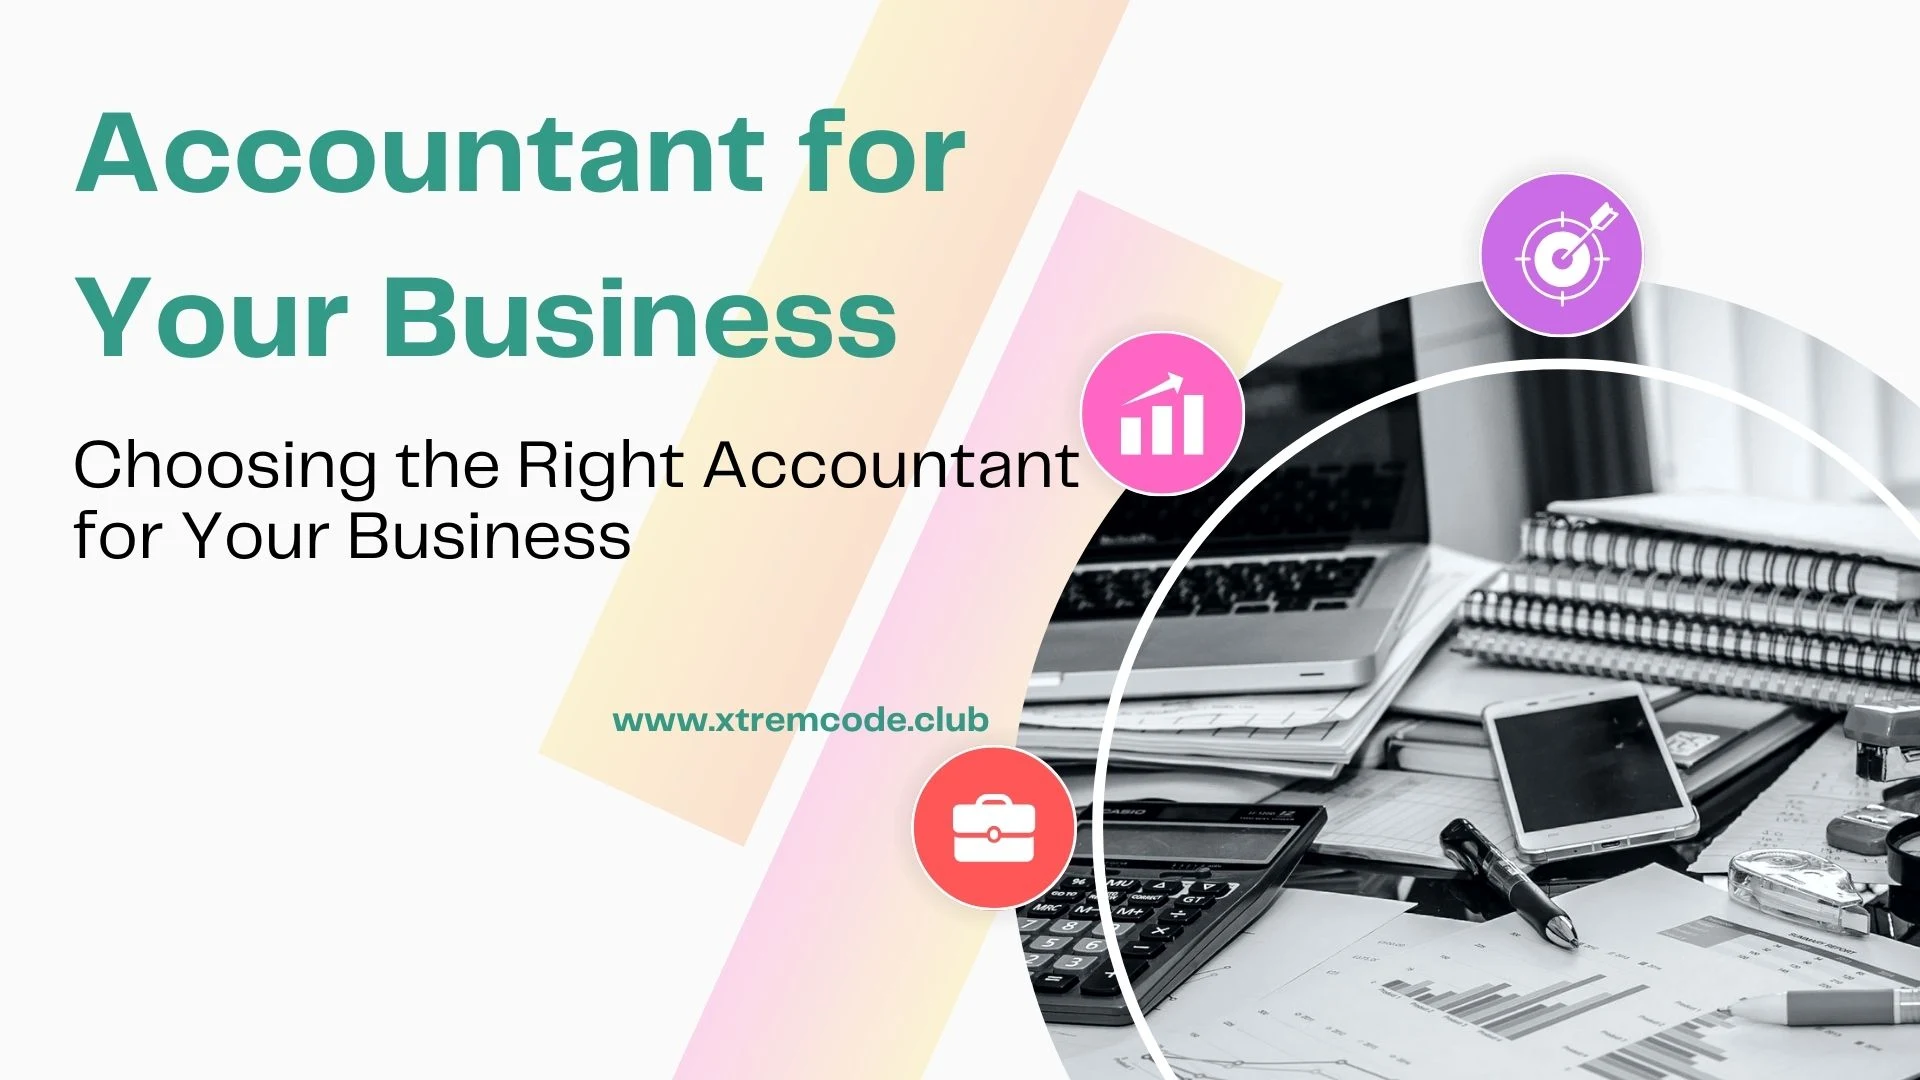 Accountant for Your Business